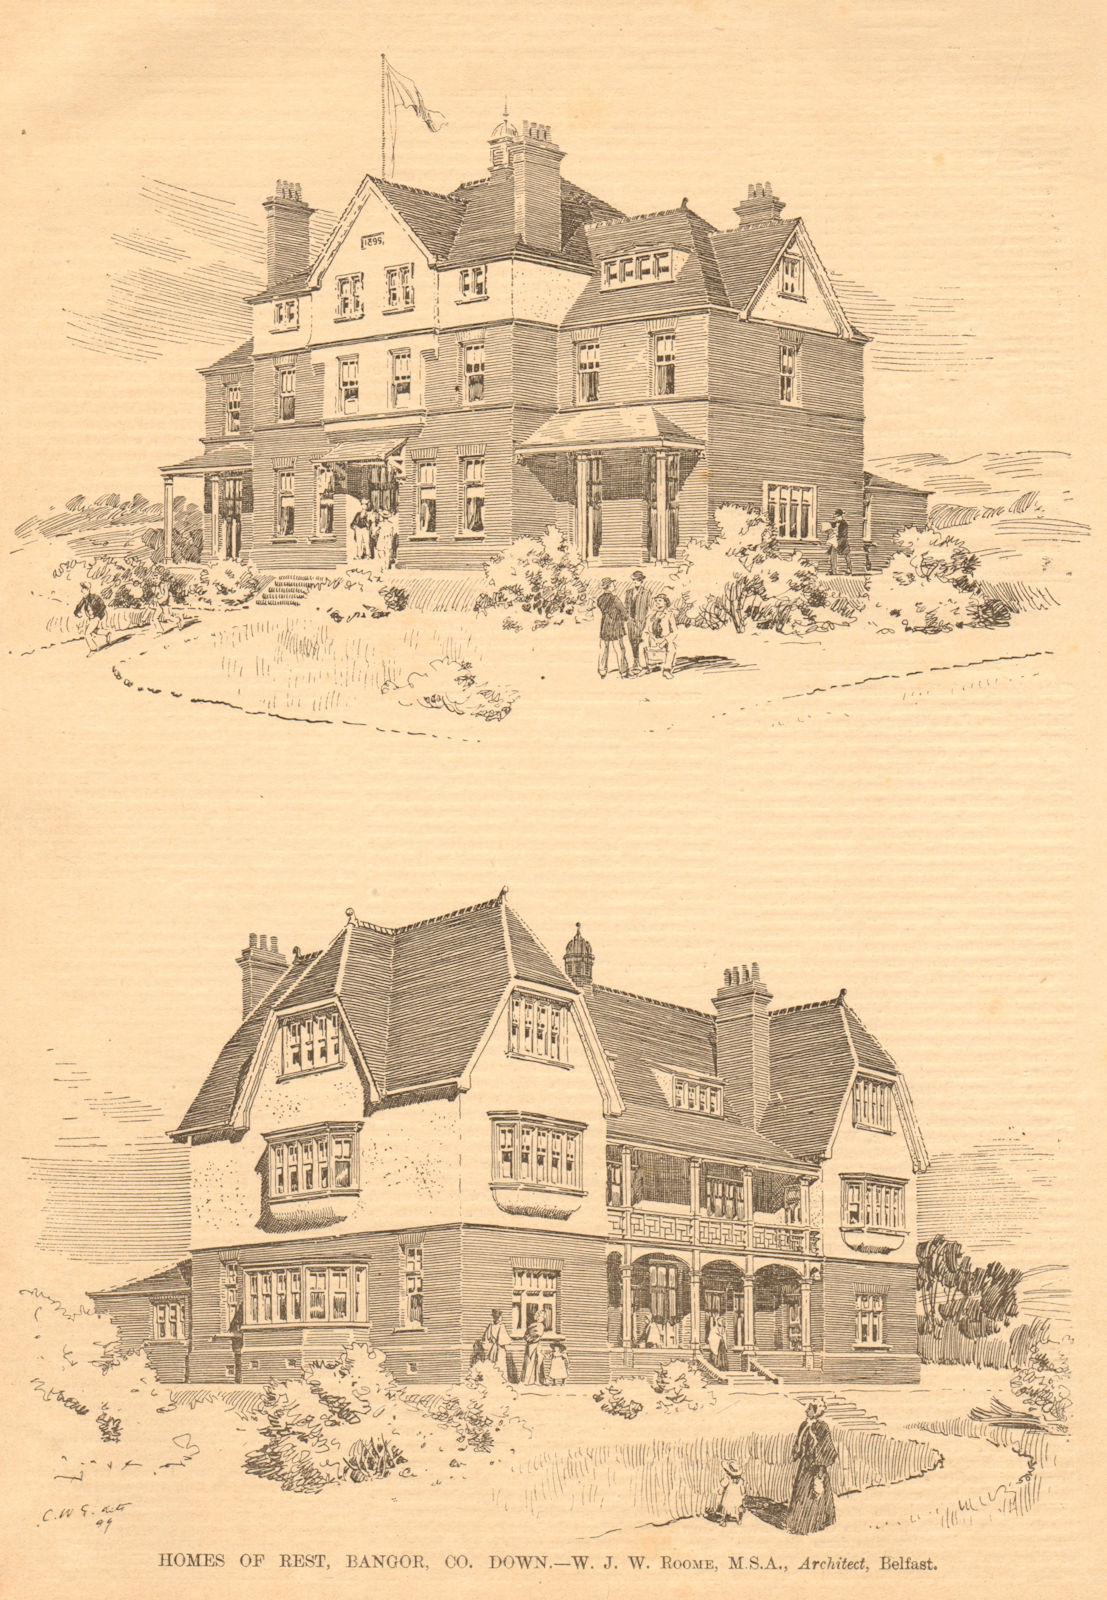 Homes of rest, Bangor, Co. Down - W.J.W. Roome, Architect, Belfast 1899 print